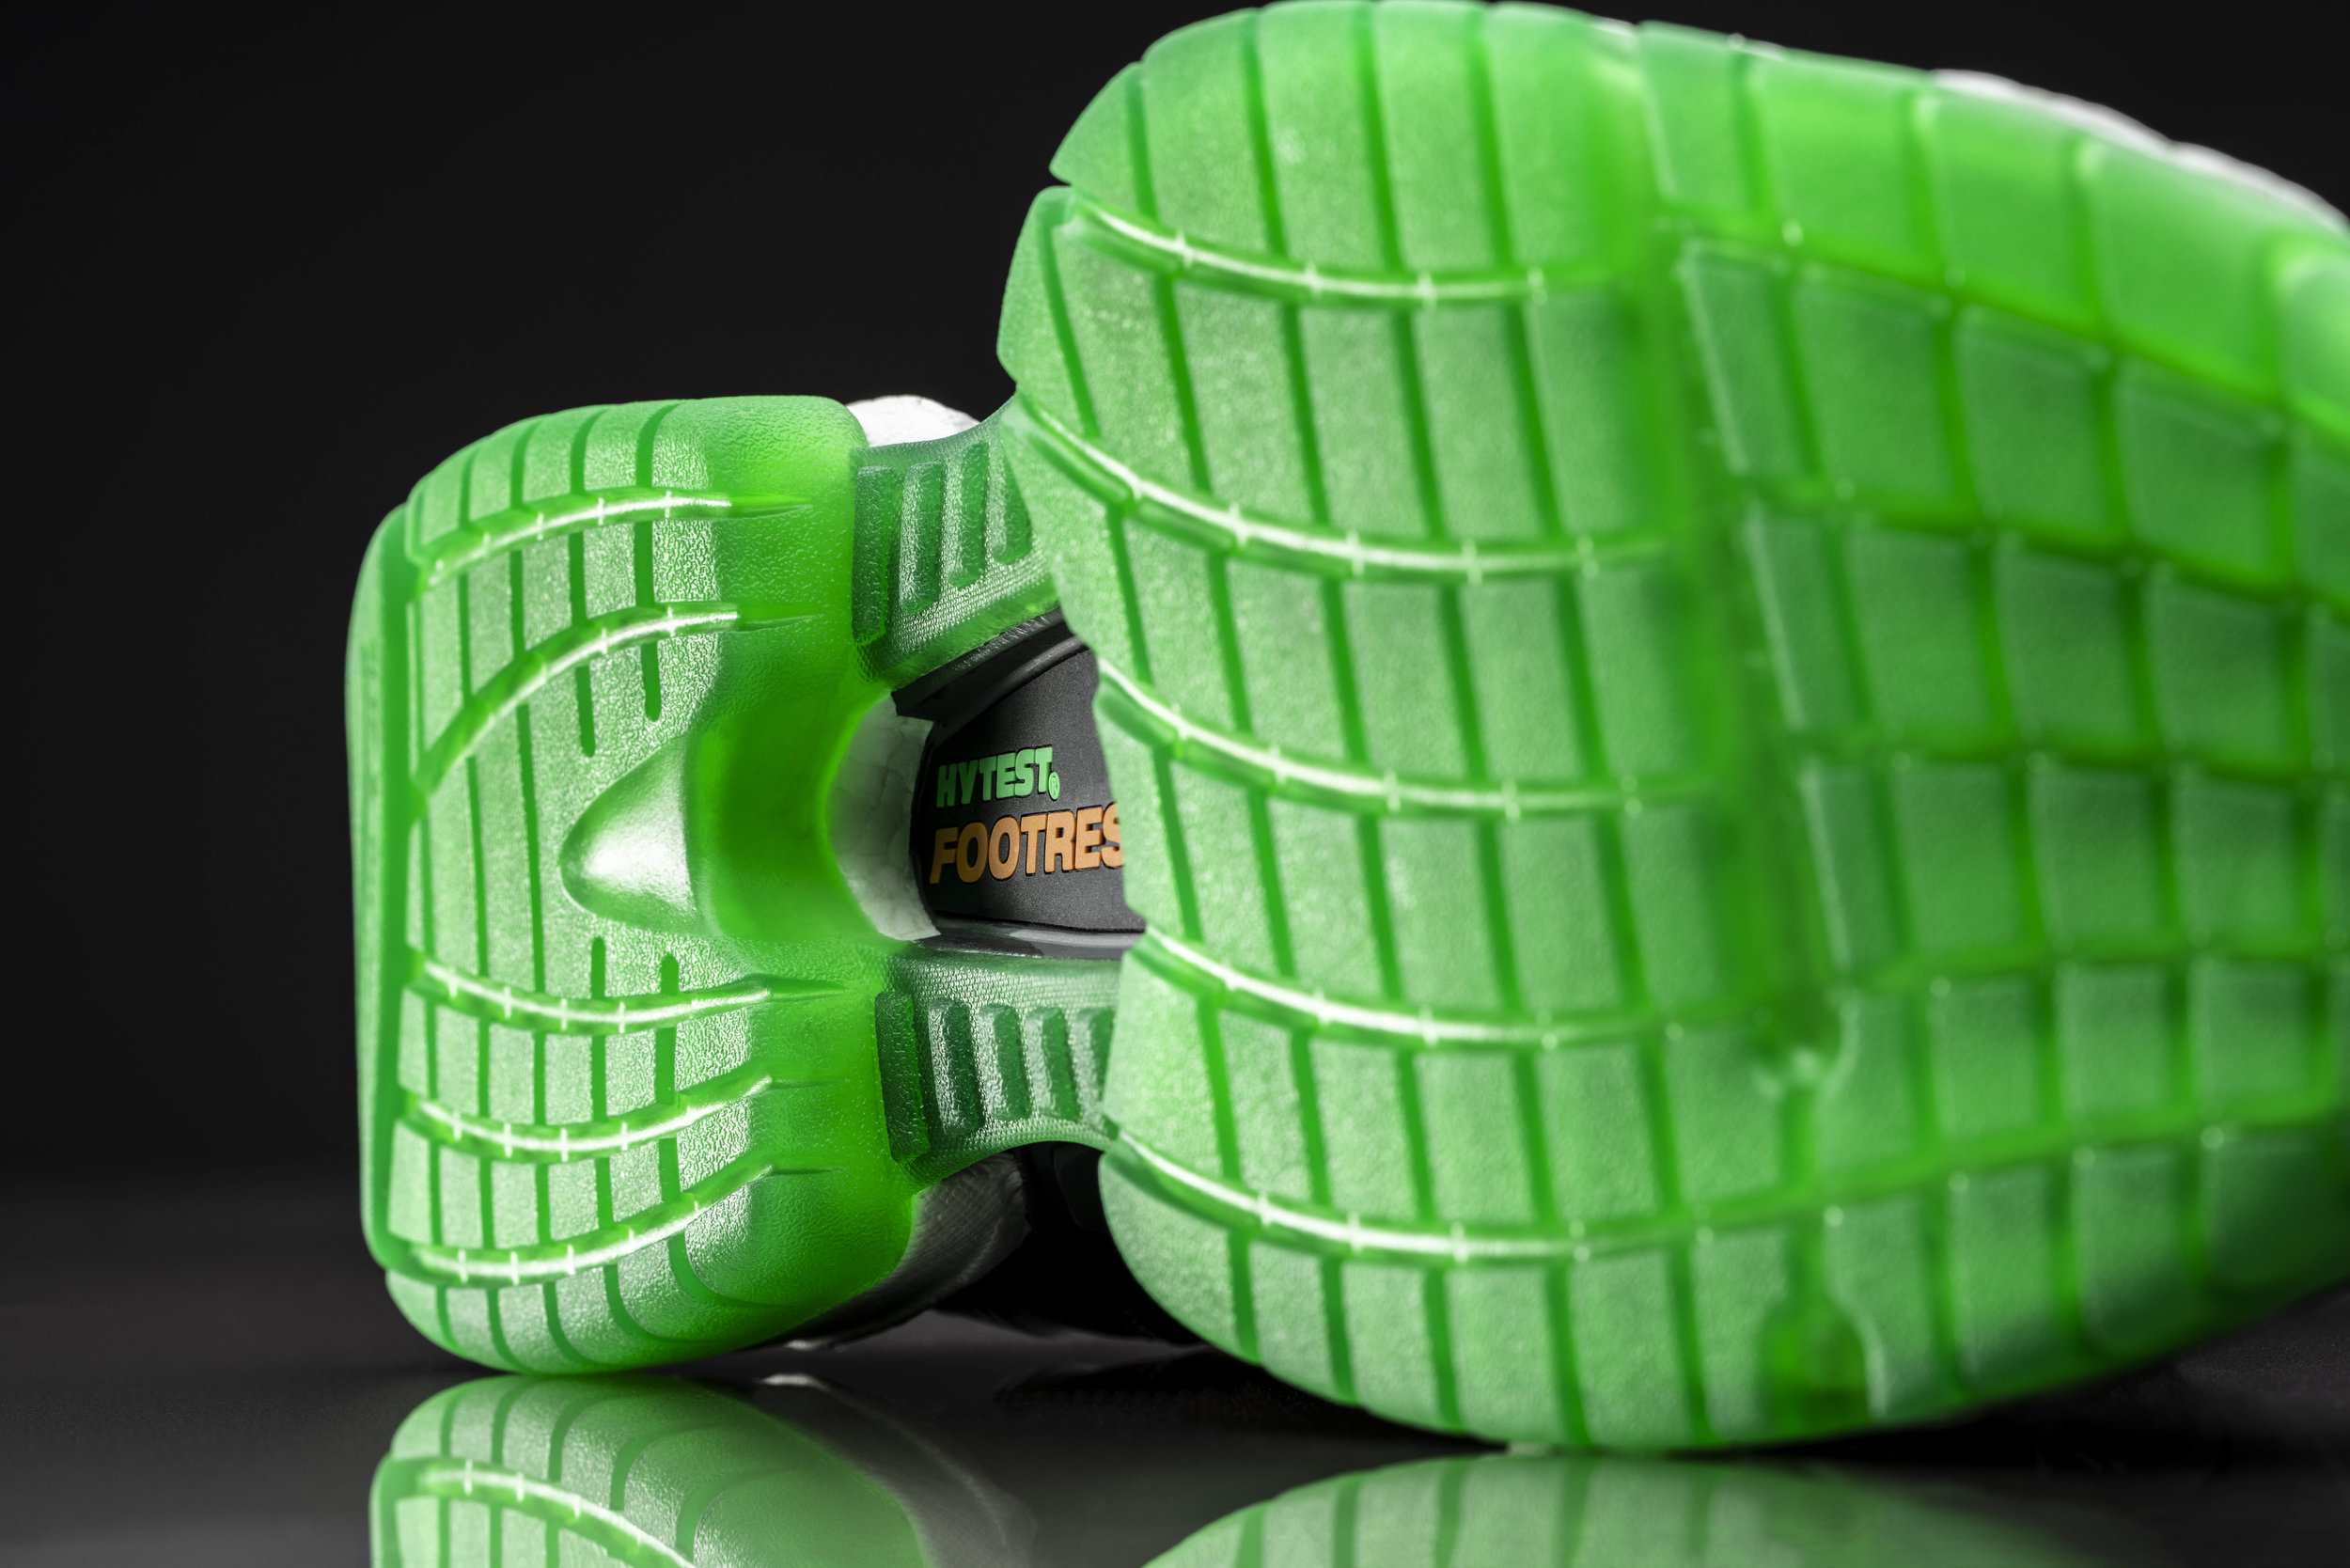 Hytest FootRests 2.0_Green_Outsole_Detail_9-186931 - Copy.jpg